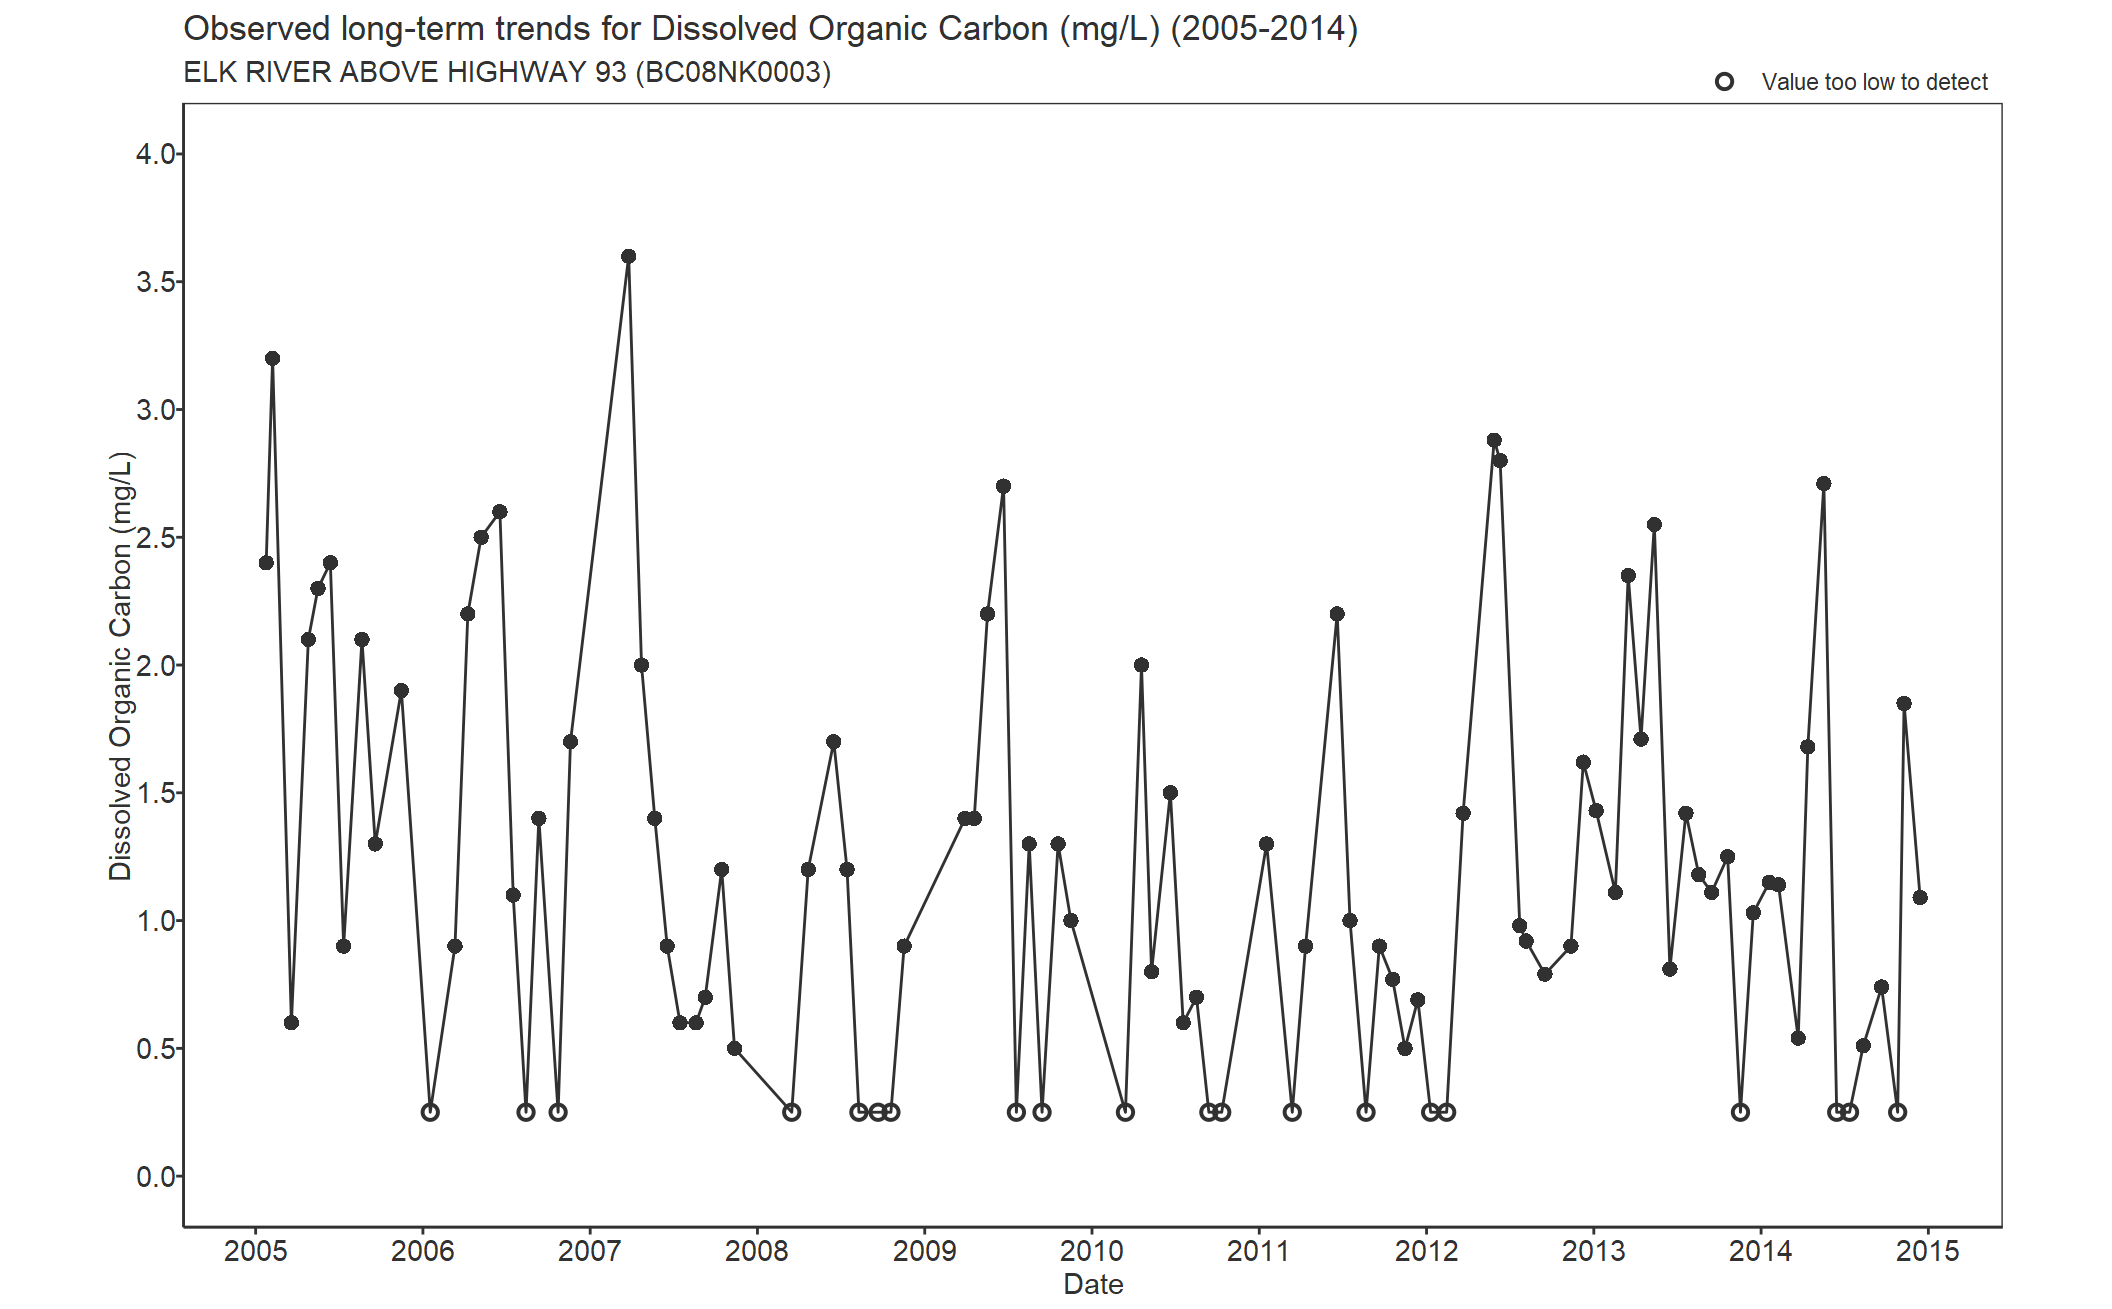 Observed long-term trends for Carbon Dissolved Organic (2005-2014)